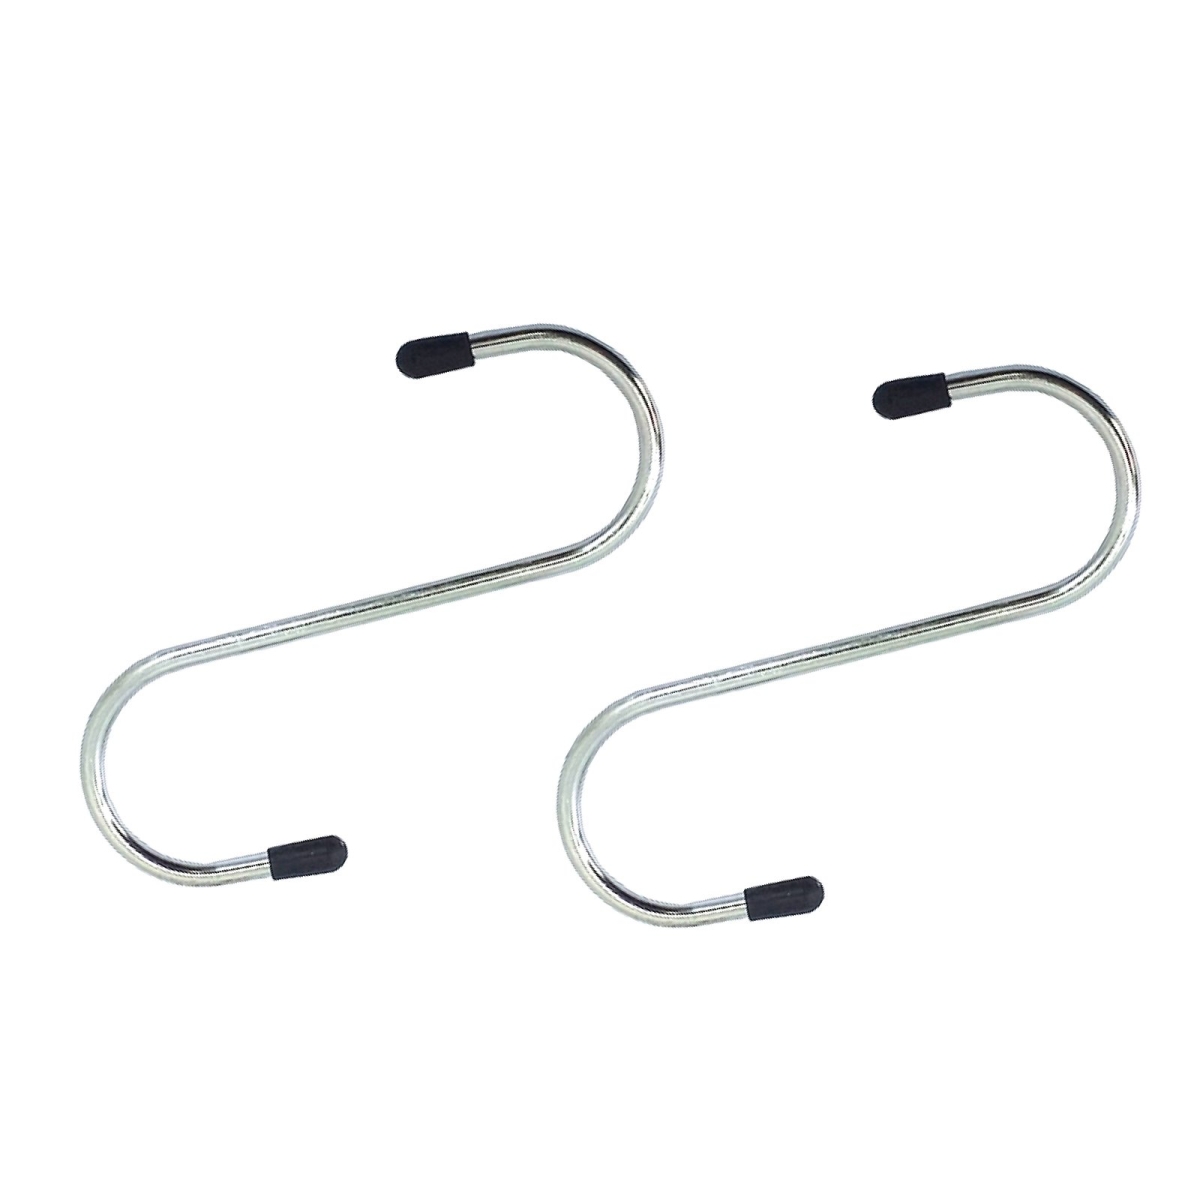 SUMO EXTREME Chrome S Hook (2 Inches - 5 Inches) - 00665T/ 00665W/  00665X/ 00665Y HOOKS & PLUGS SUMO EXTREME Malaysia, Selangor, Kuala Lumpur  (KL), Shah Alam Supplier, Suppliers, Supply, Supplies